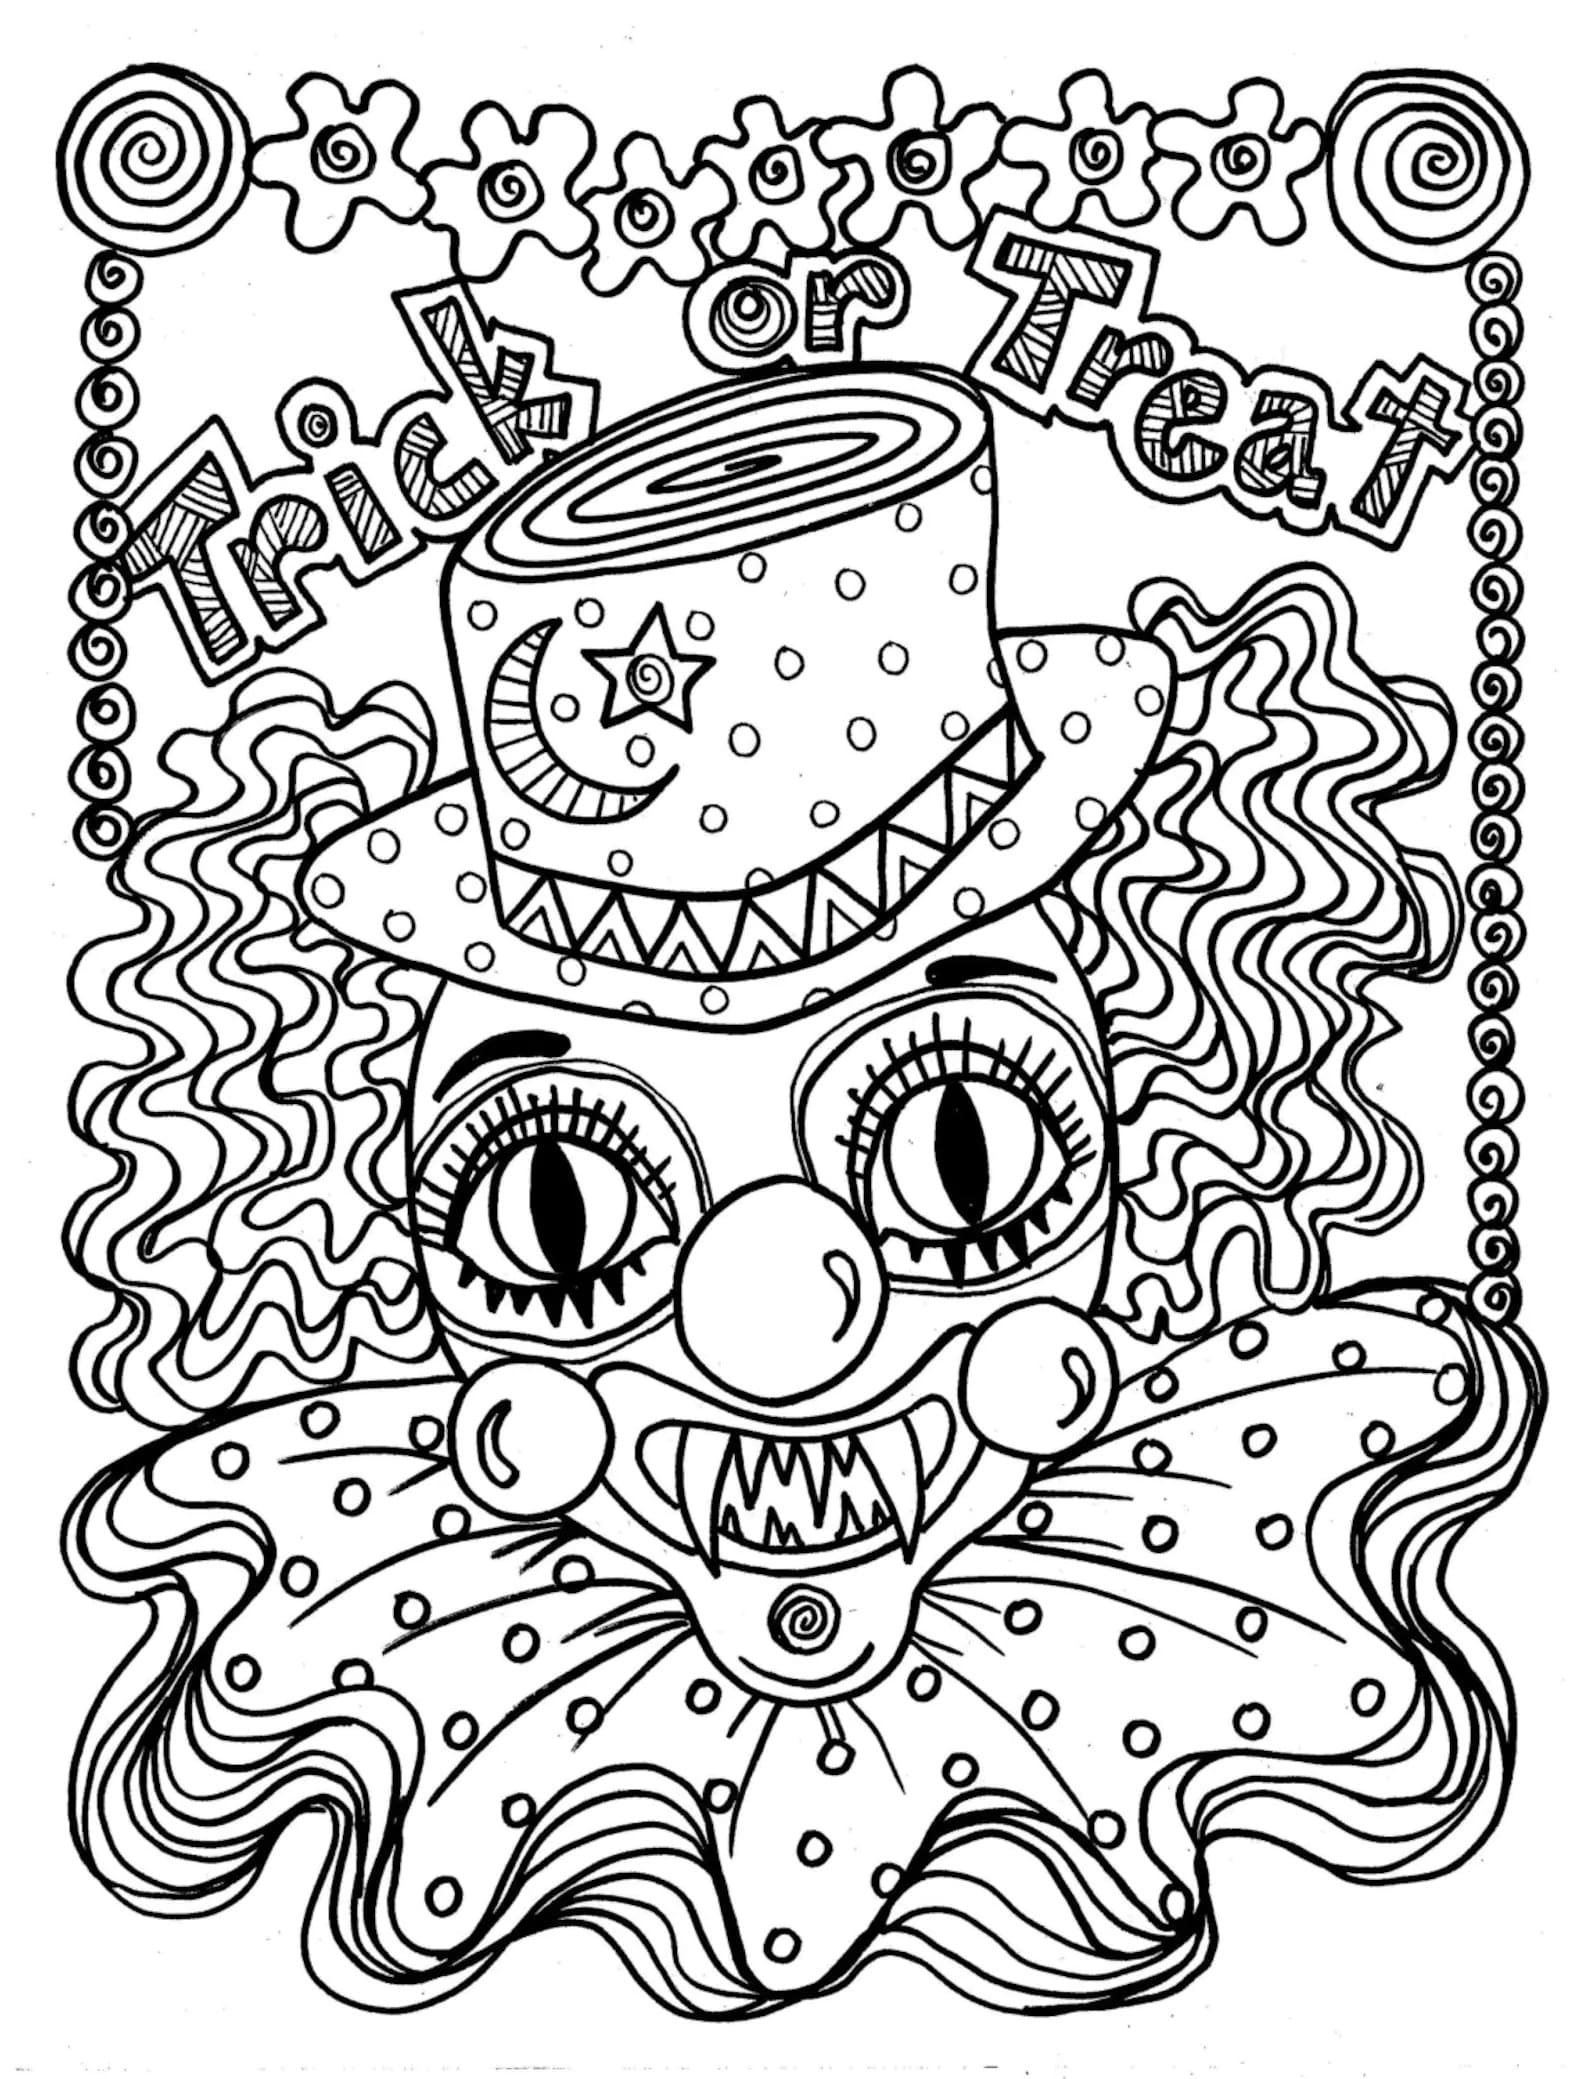 Raskrasil.com-Coloring-Pages-Halloween-for-adults-85